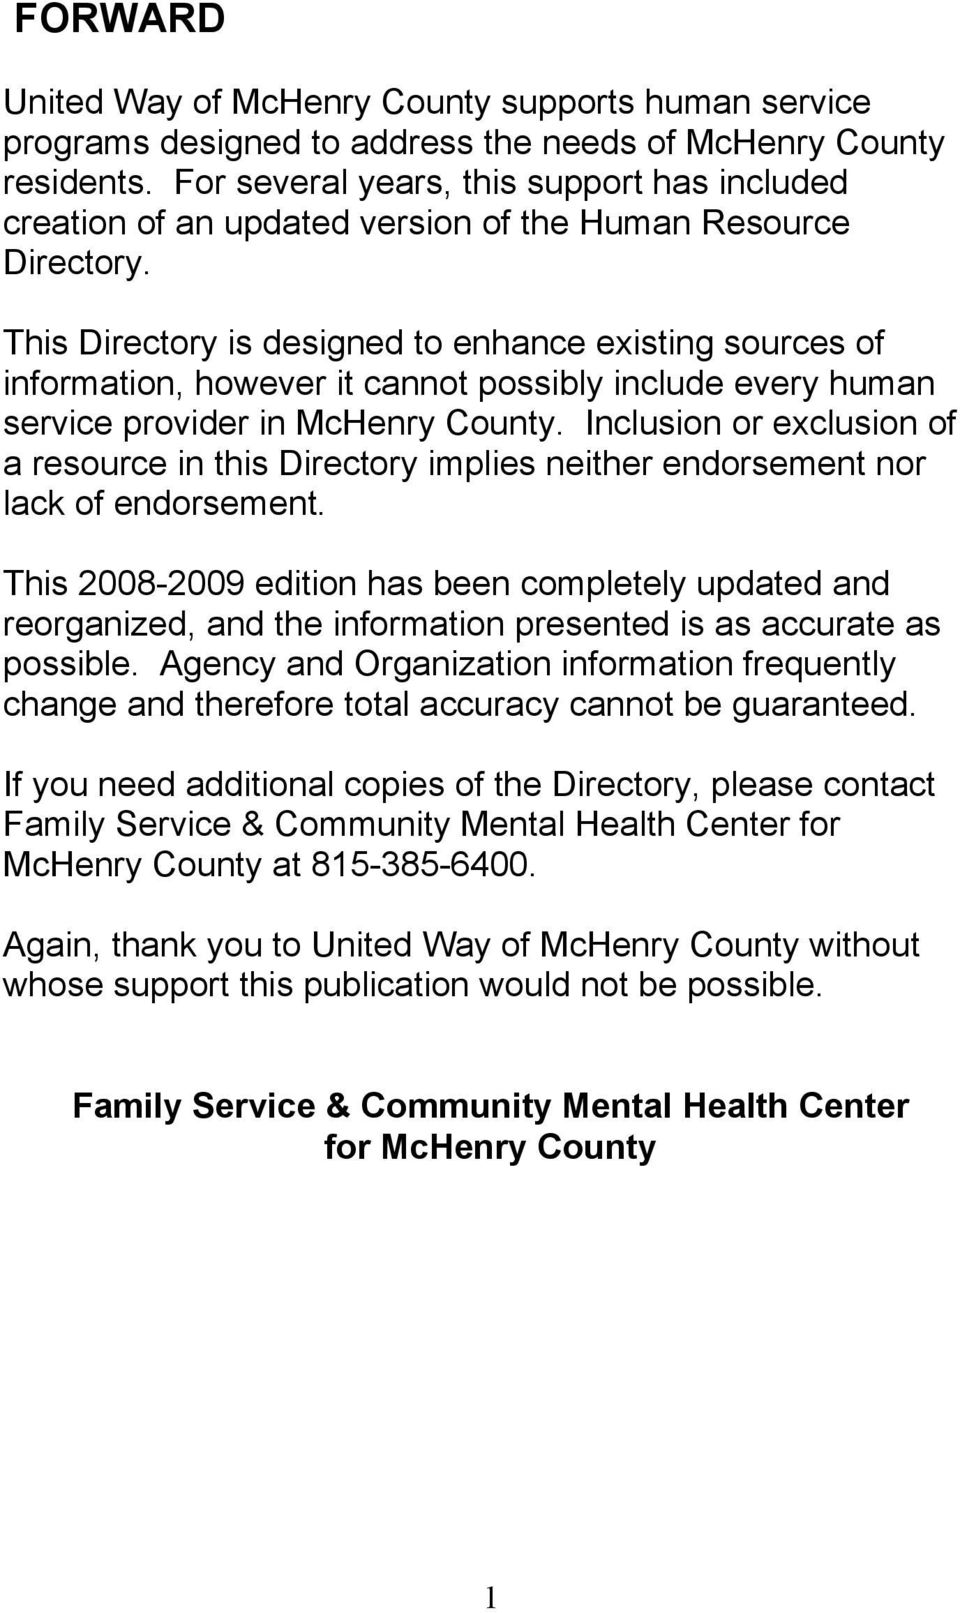 This Directory is designed to enhance existing sources of information, however it cannot possibly include every human service provider in McHenry County.